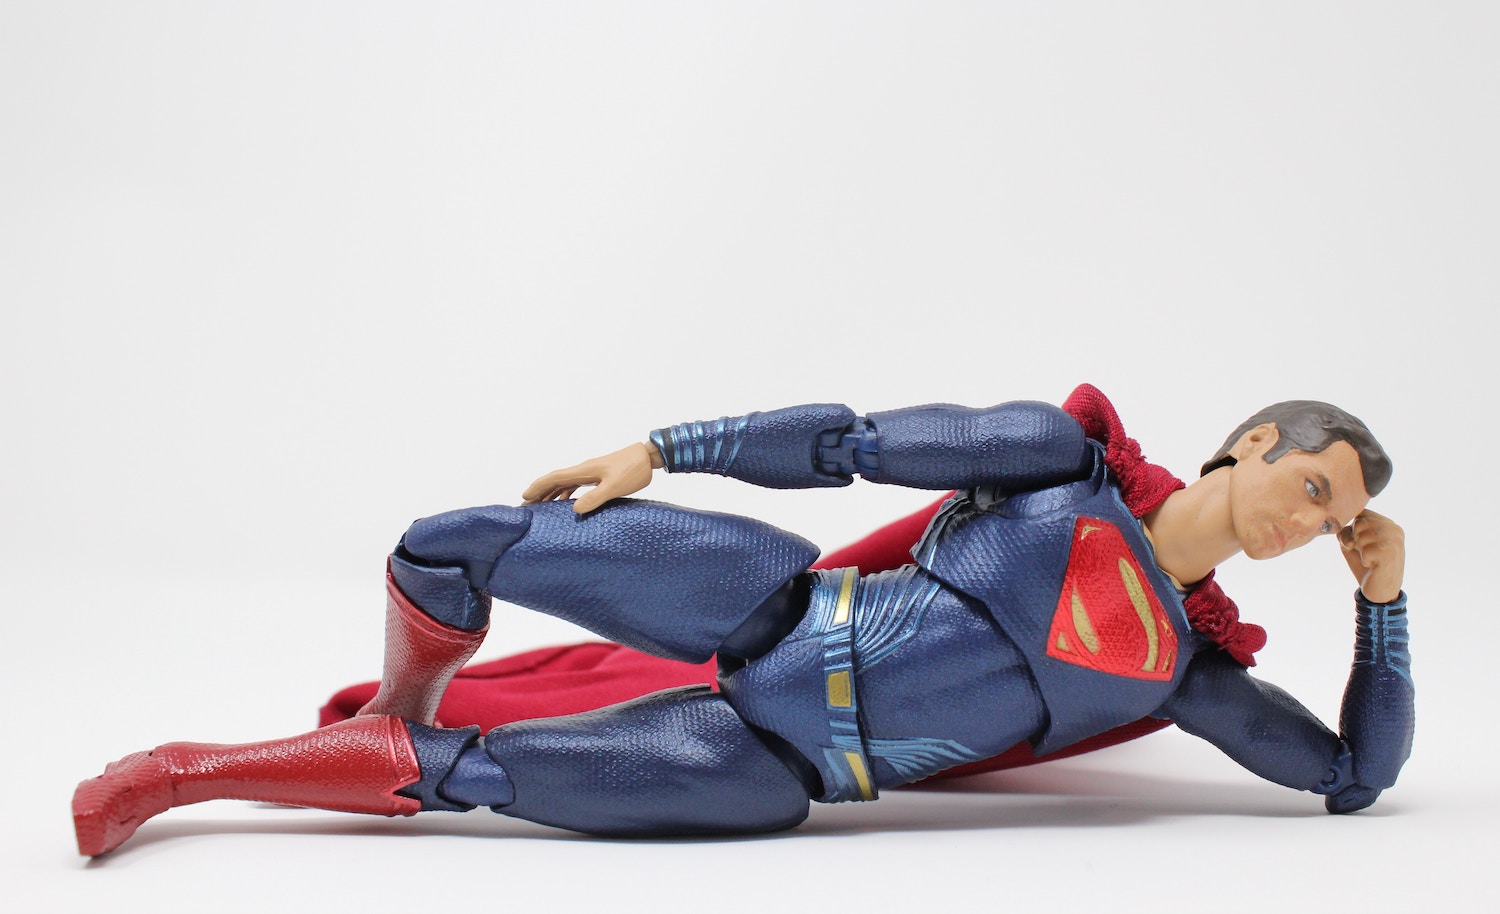 a Superman toy representing each introverted Myers-Briggs personality types' kryptonite